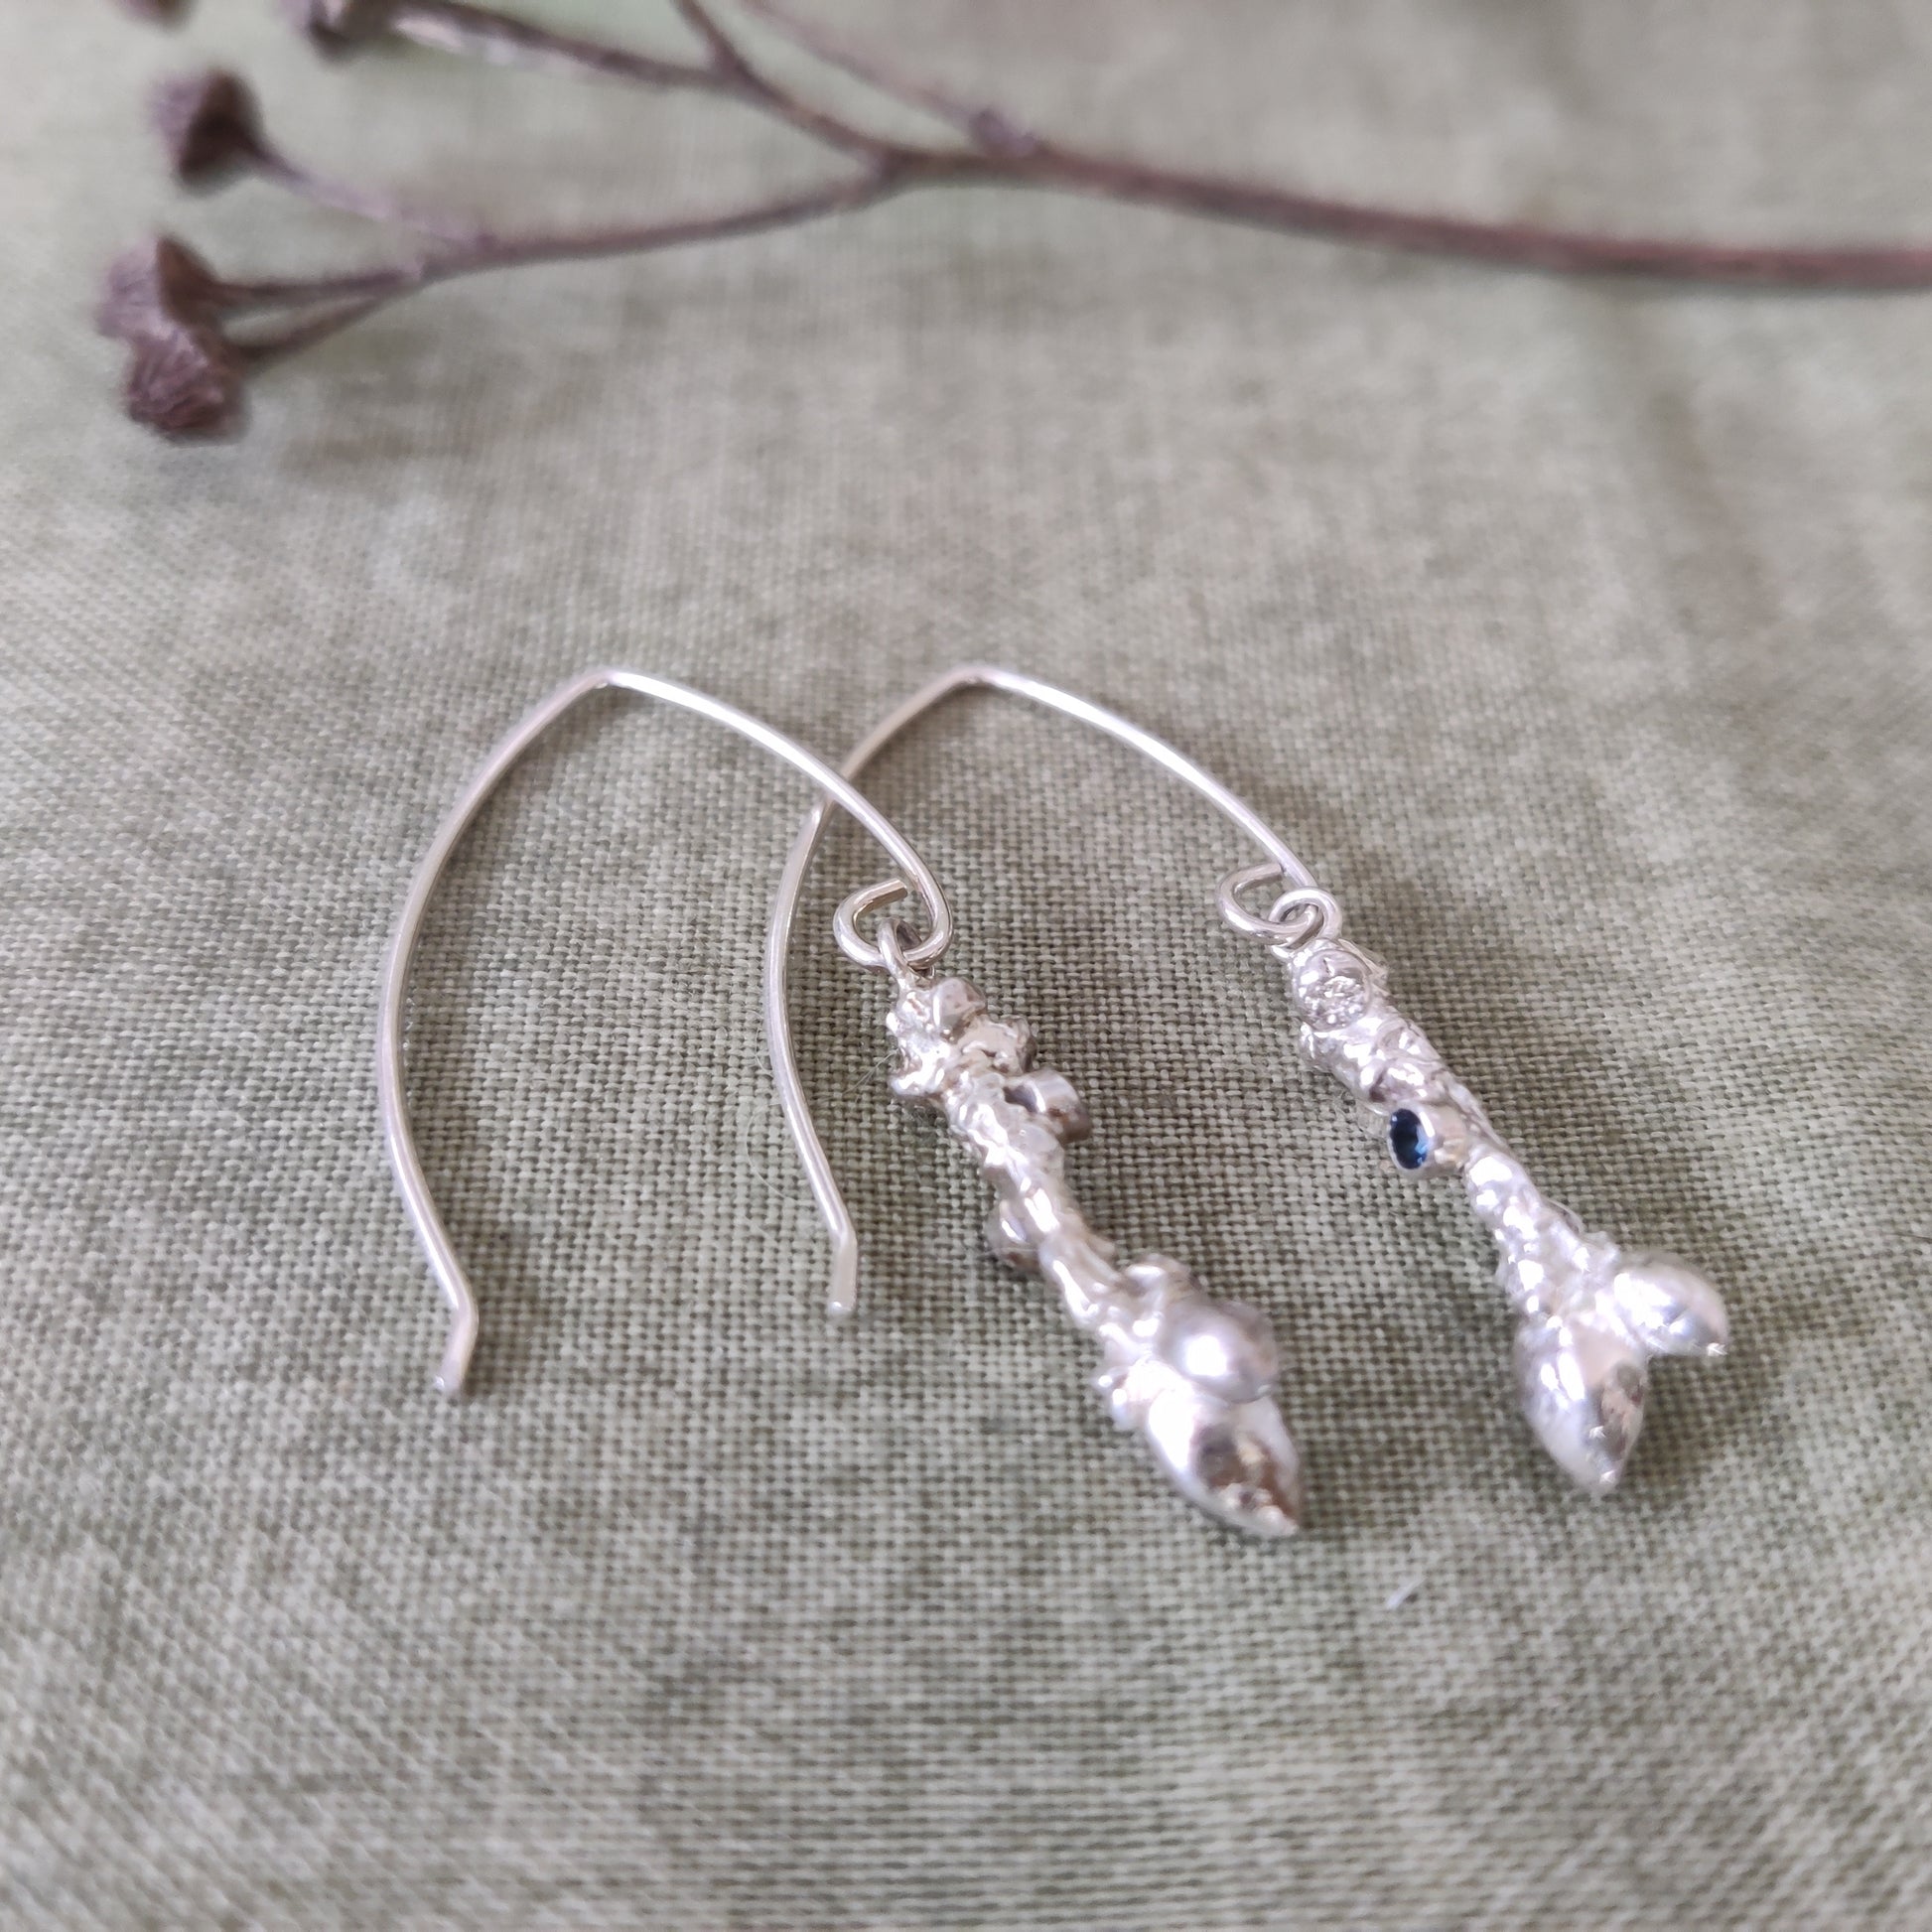 Woodland inspired small drop earrings handcrafted in 925 sterling silver.